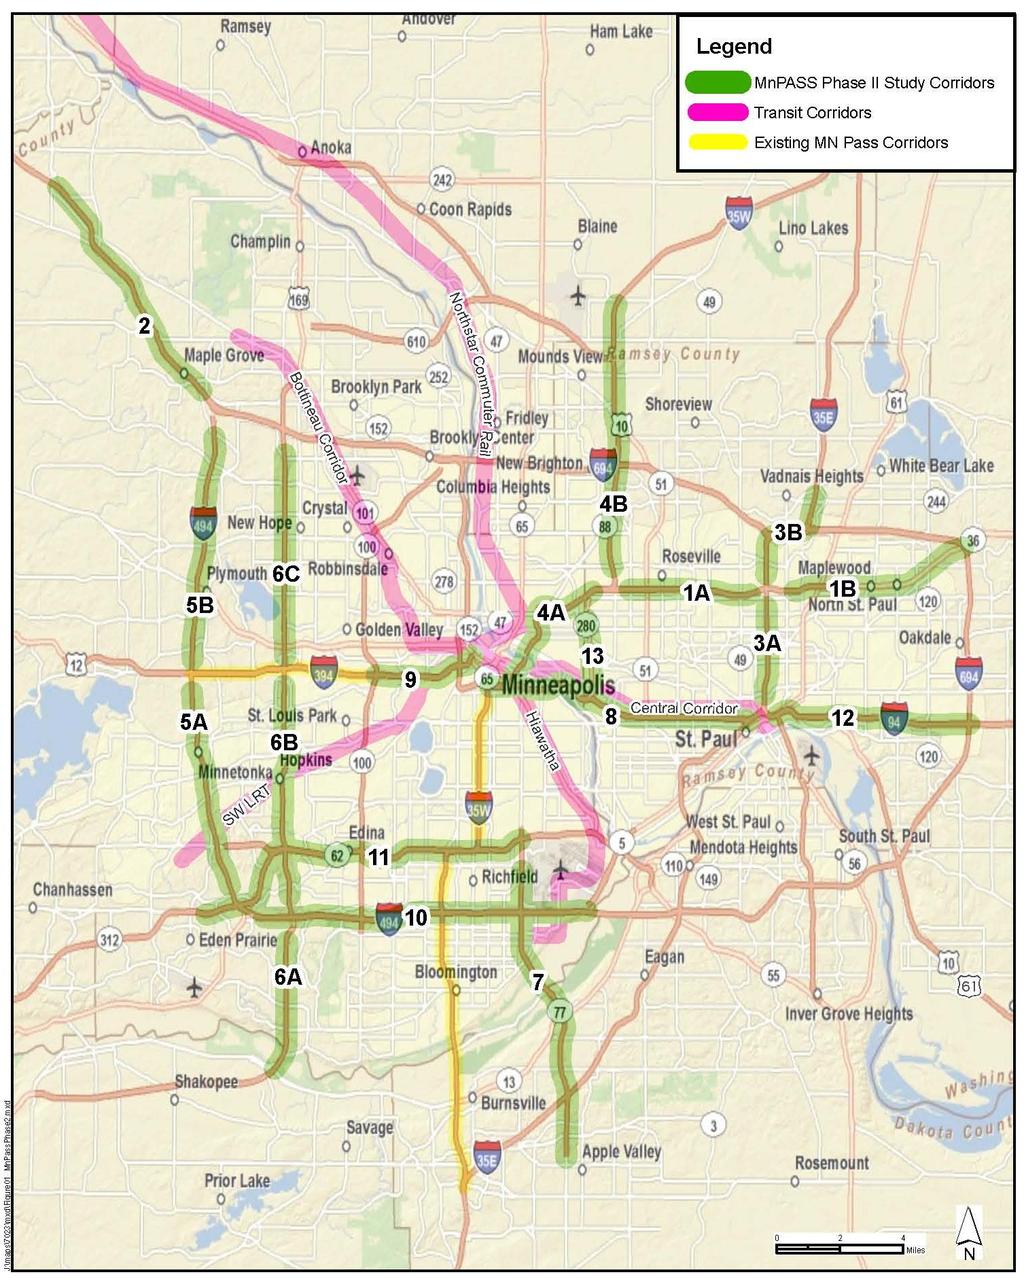 Potential MnPASS Corridors 1. TH 36: I-35W to I-694 2. I-94: TH 101 to I-494 3. I-35E: I-94 to CR E 4. I-35W: Minneapolis to Blaine 5. I-494: TH 212 to I-94 6. TH 169: TH 101 to I-94 7.